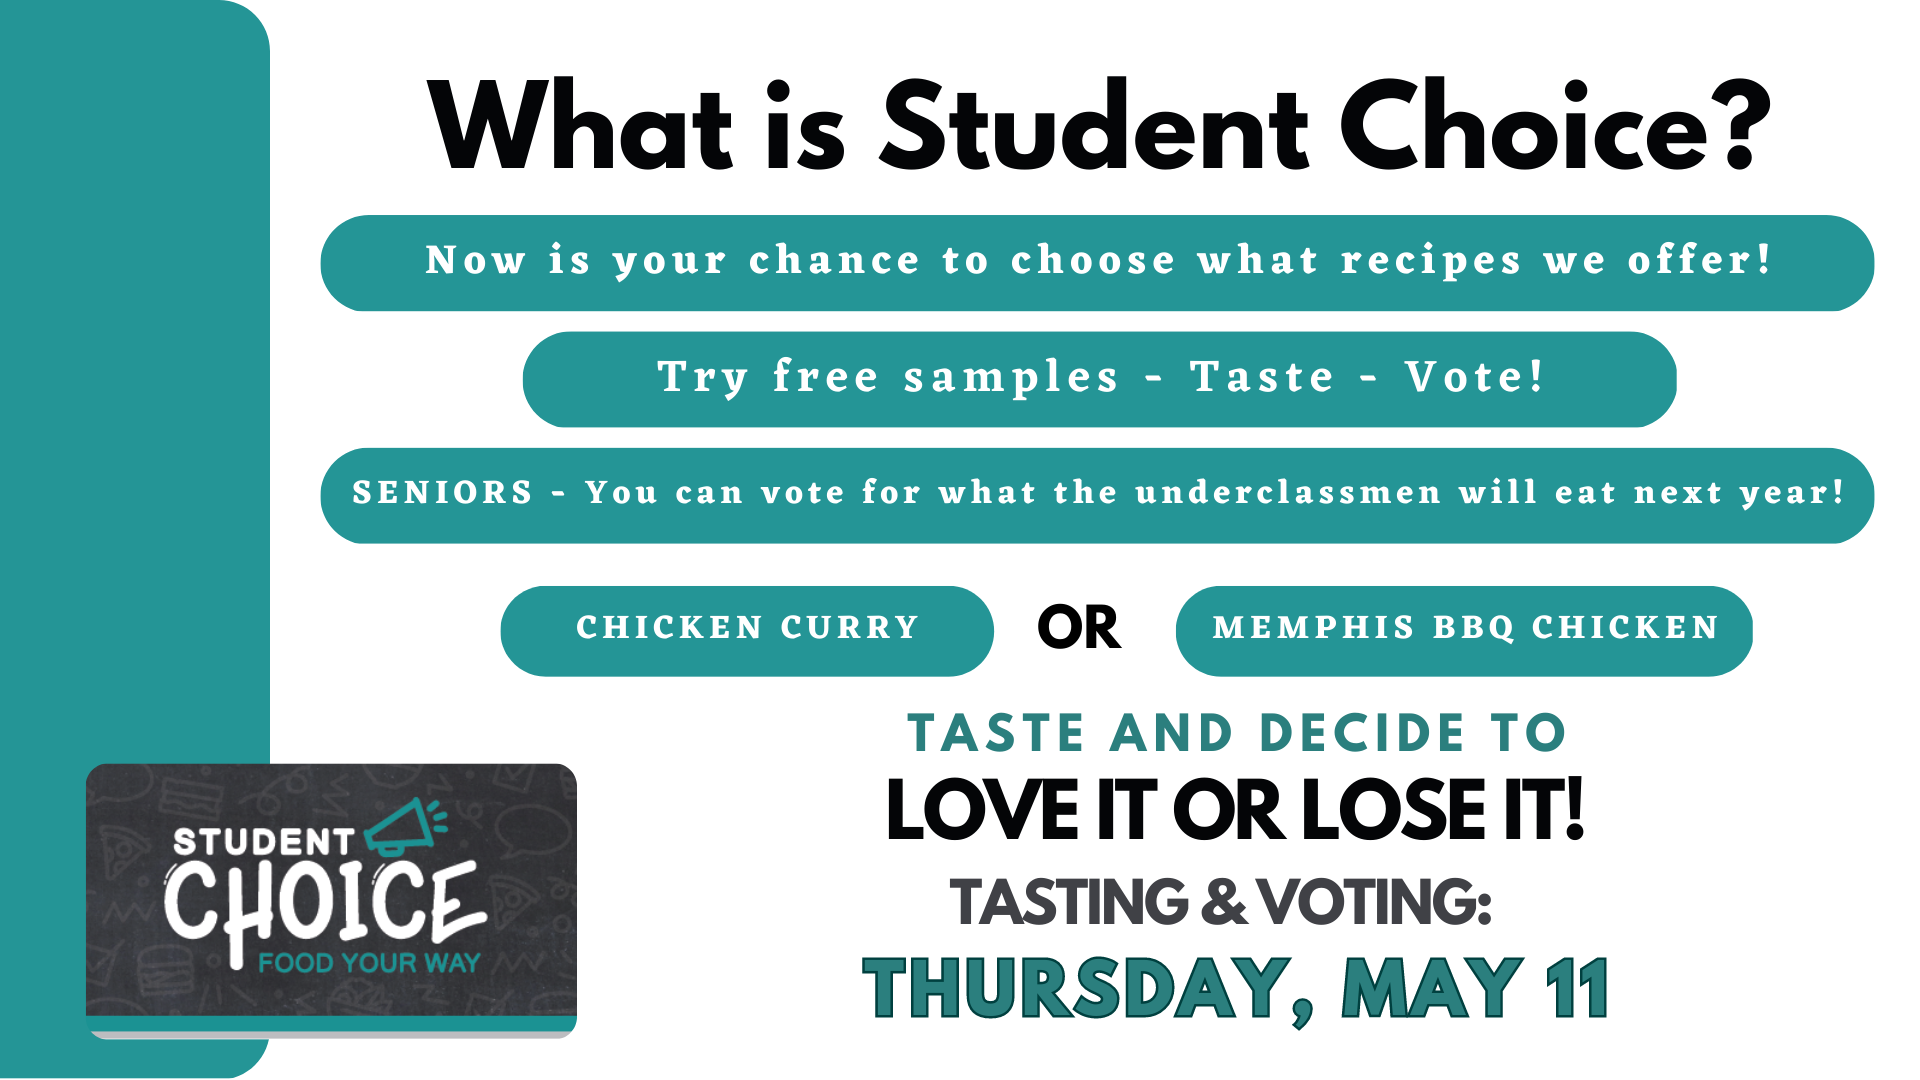 Student Choice - vote May 11 for Chicken Curry or Memphis BBQ Chicken